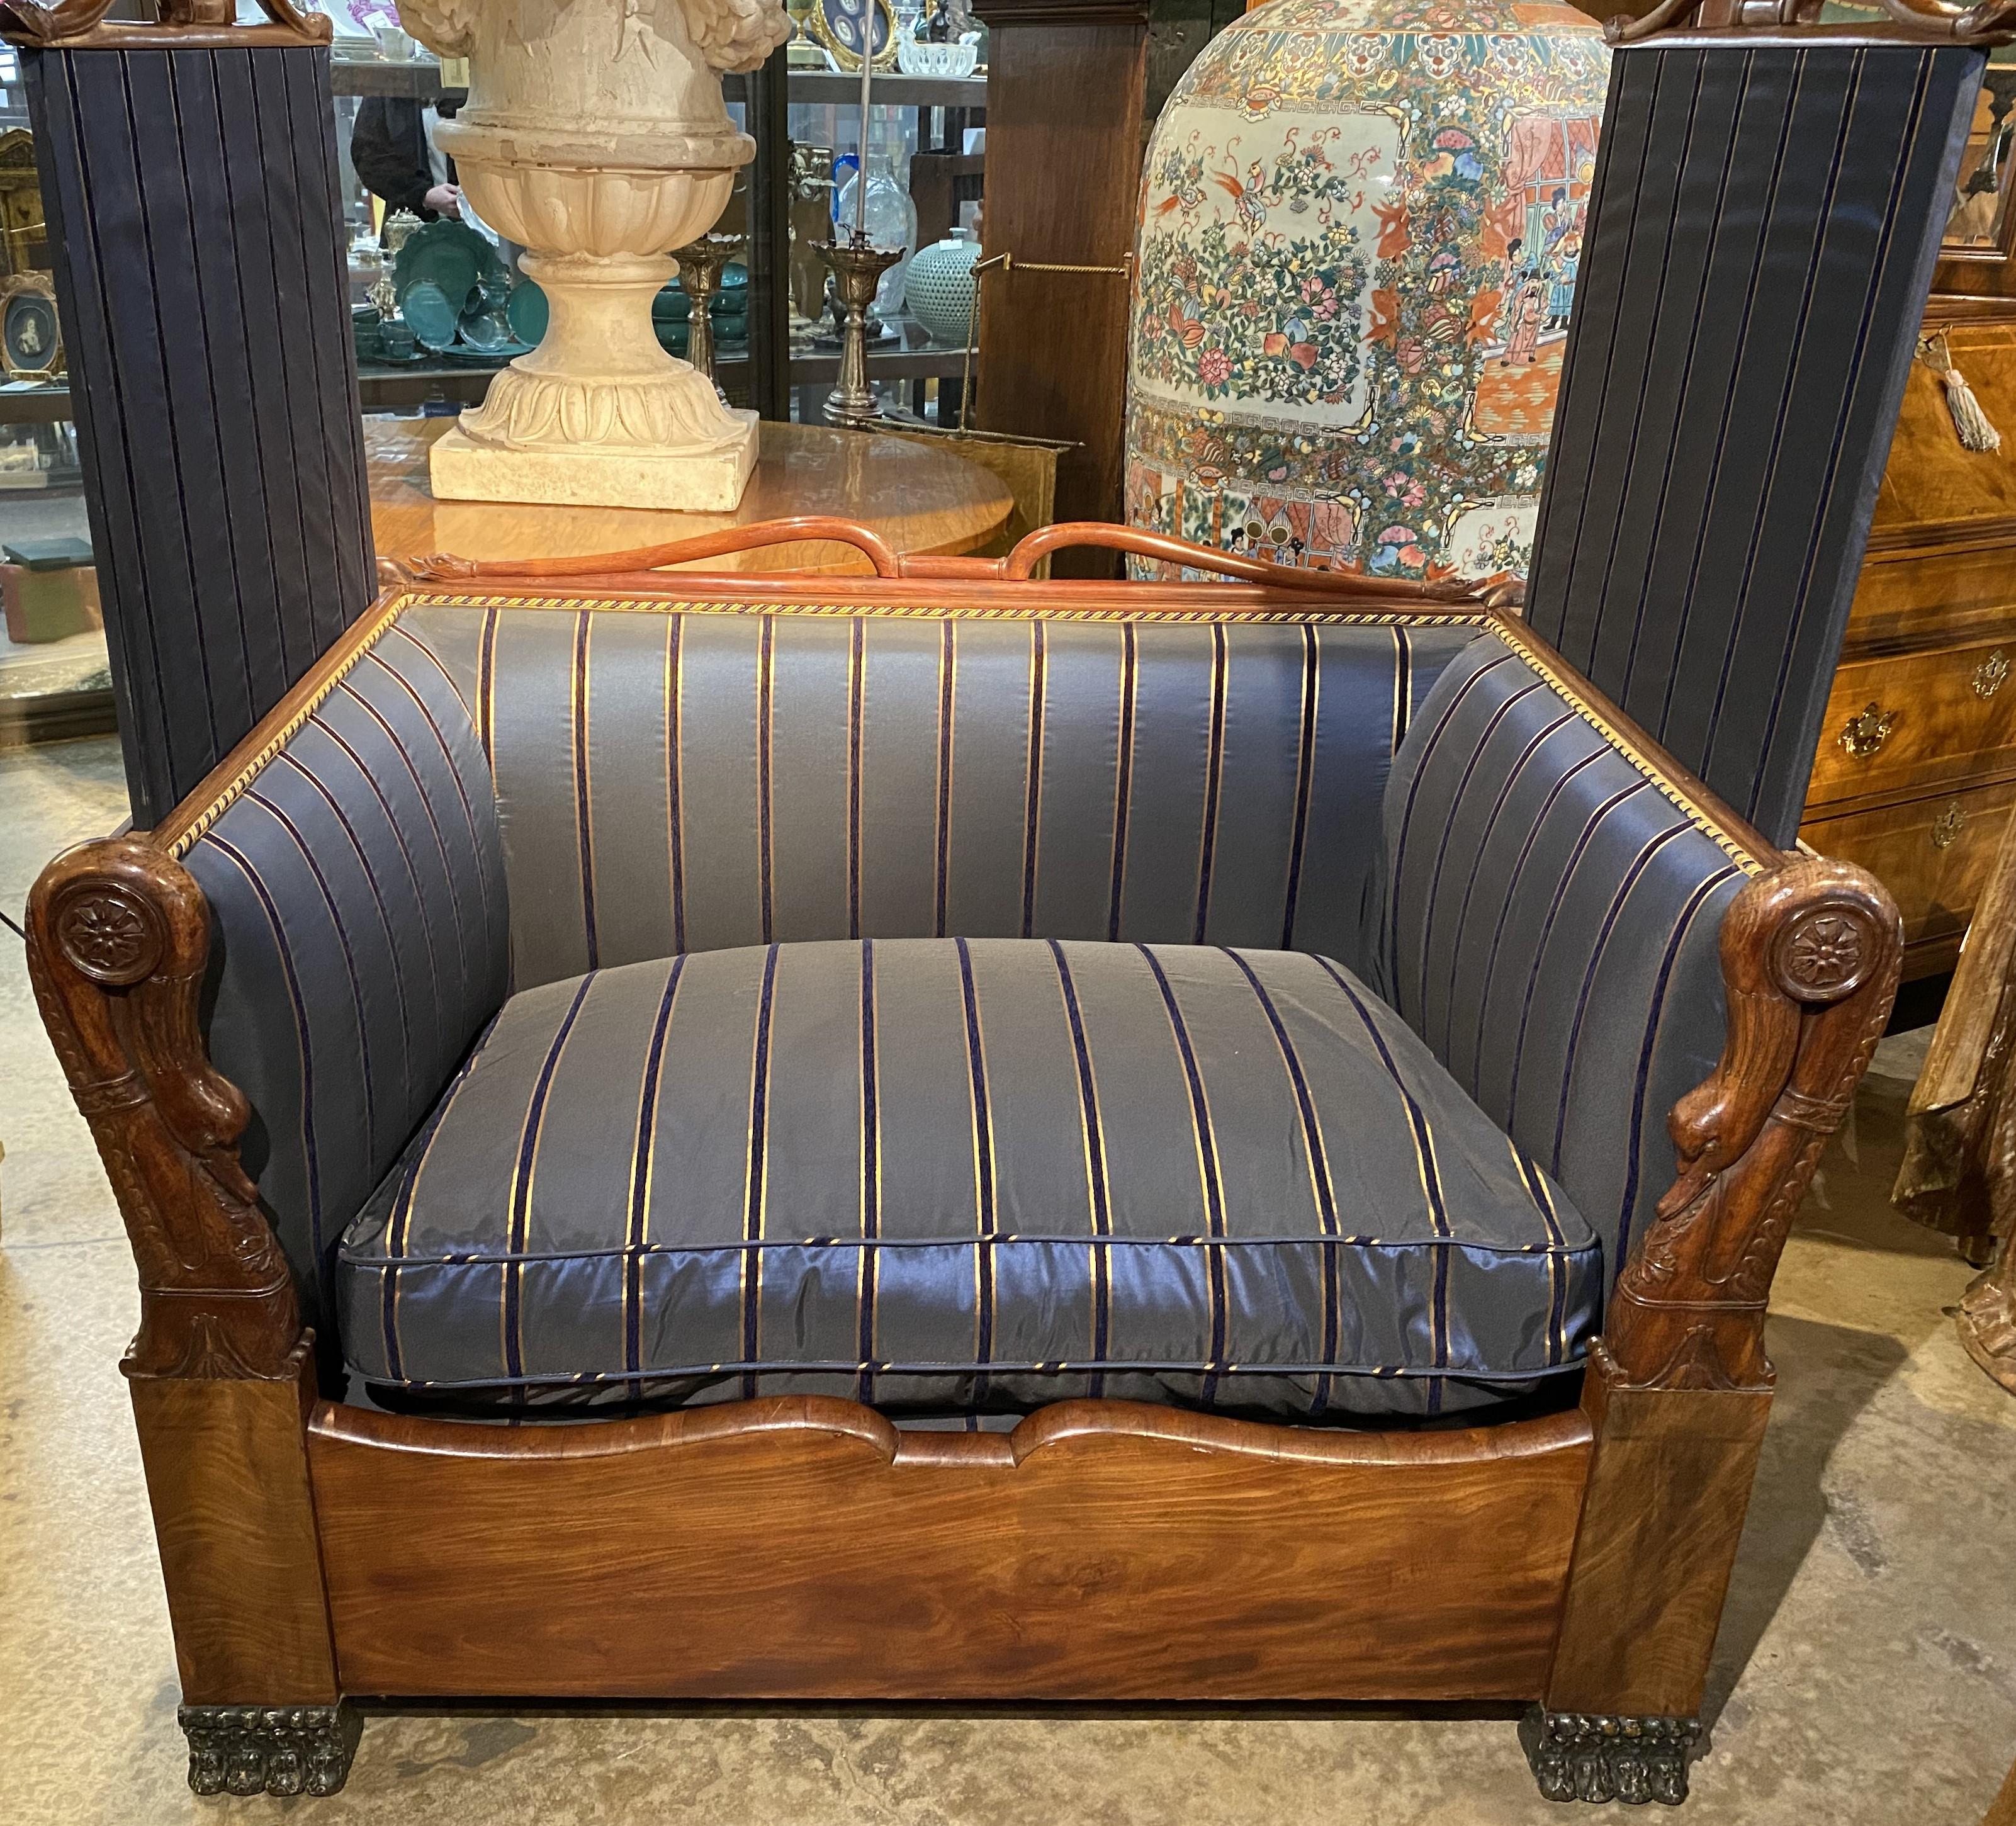 A wonderful French Empire walnut “kissing settee” with carved swan arms, crests, and corners, privacy screens which raise up on each side, adorned with striped satin upholstery and seat cushion with gold & purple cord accents, all supported by